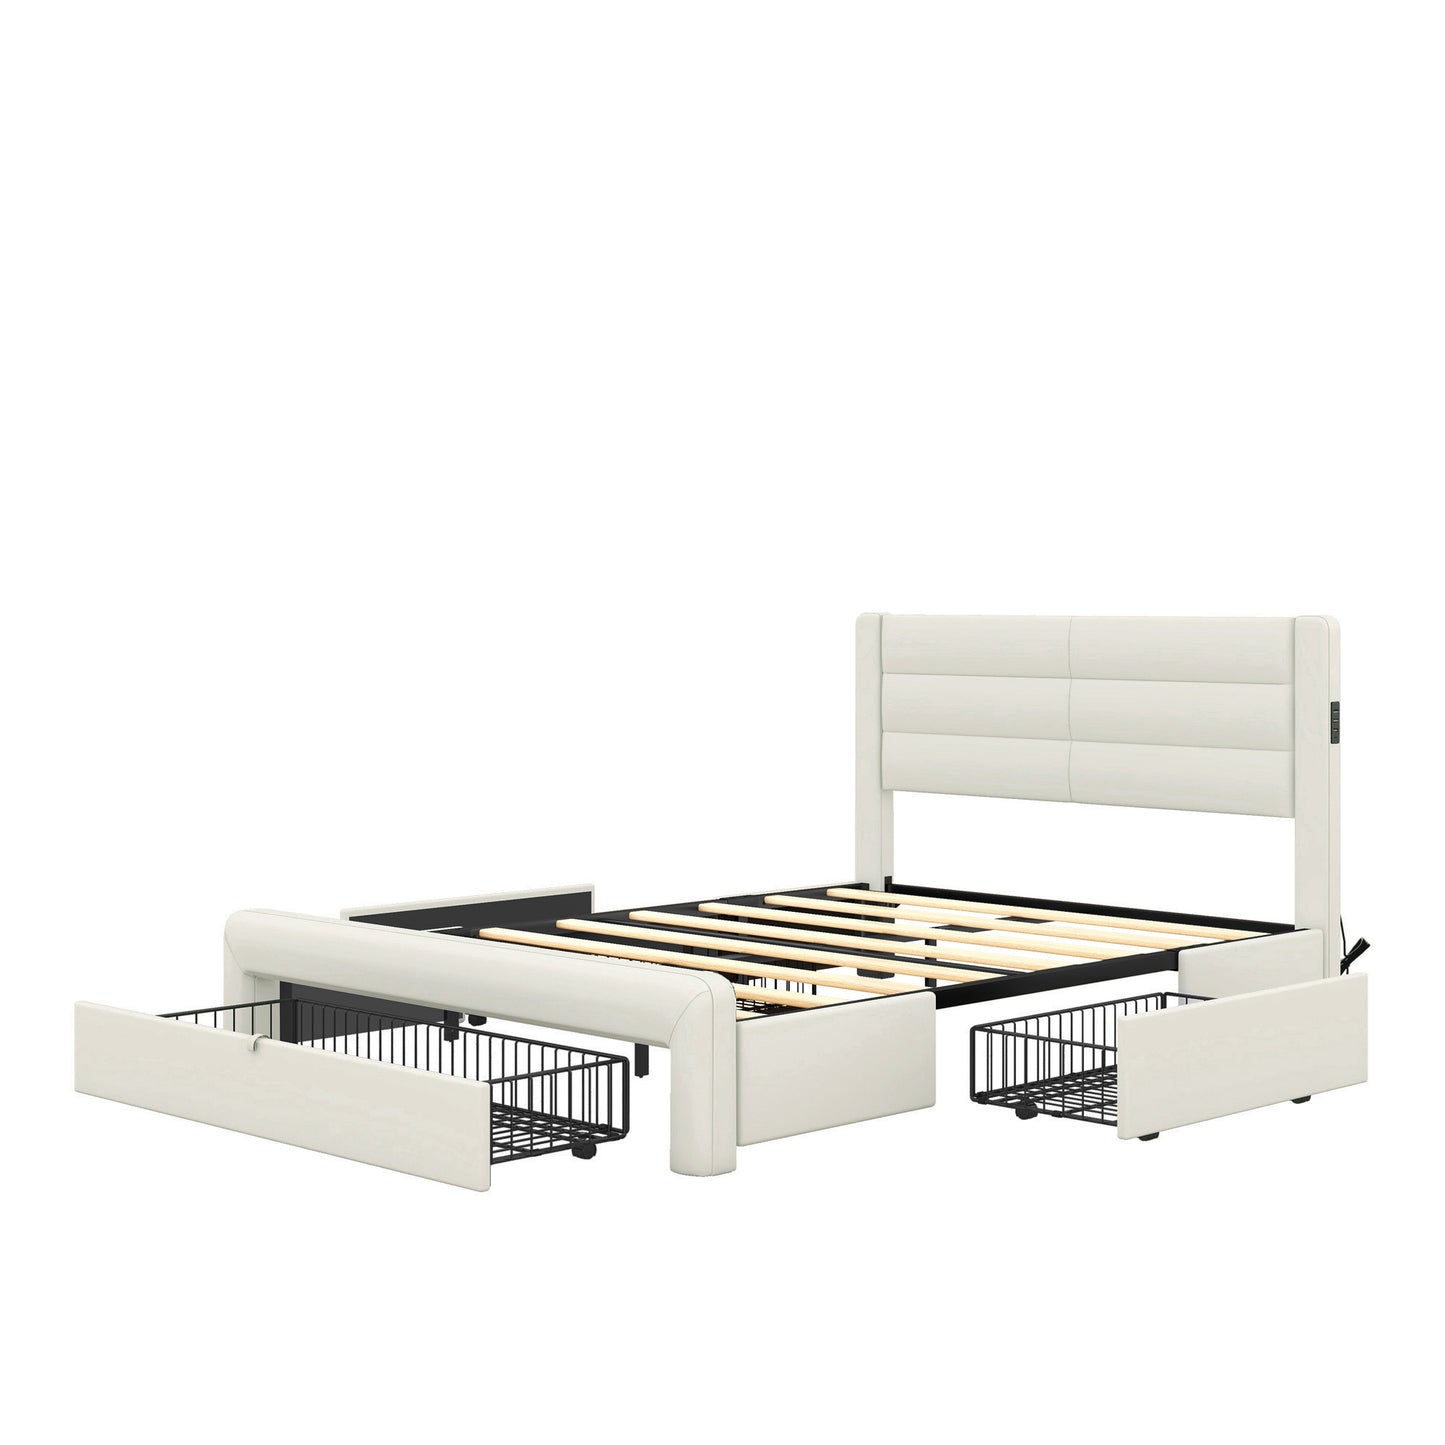 Queen Size Bed Frame with Drawers Storage, Leather Upholstered Platform Bed with Charging Station,Beige